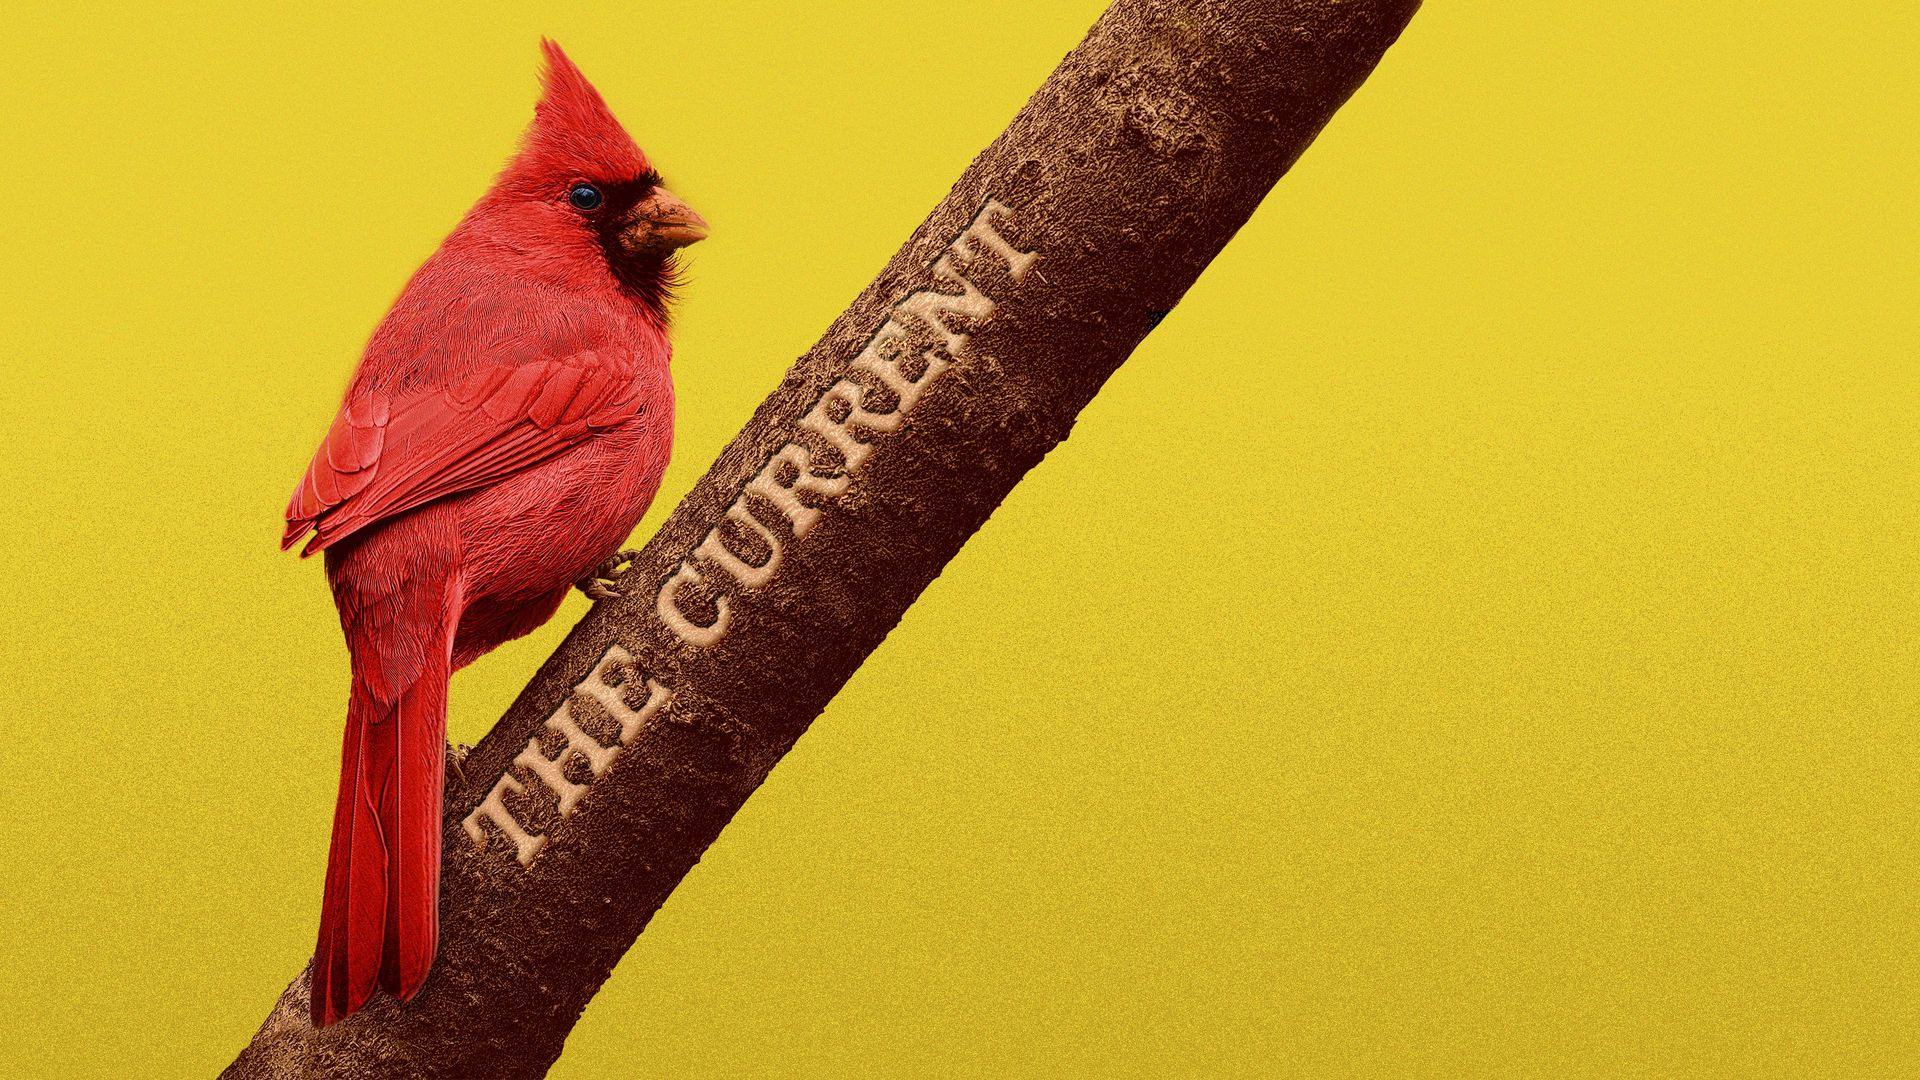 Illustration of a cardinal sitting on a branch with "The Current" carved into the branch.